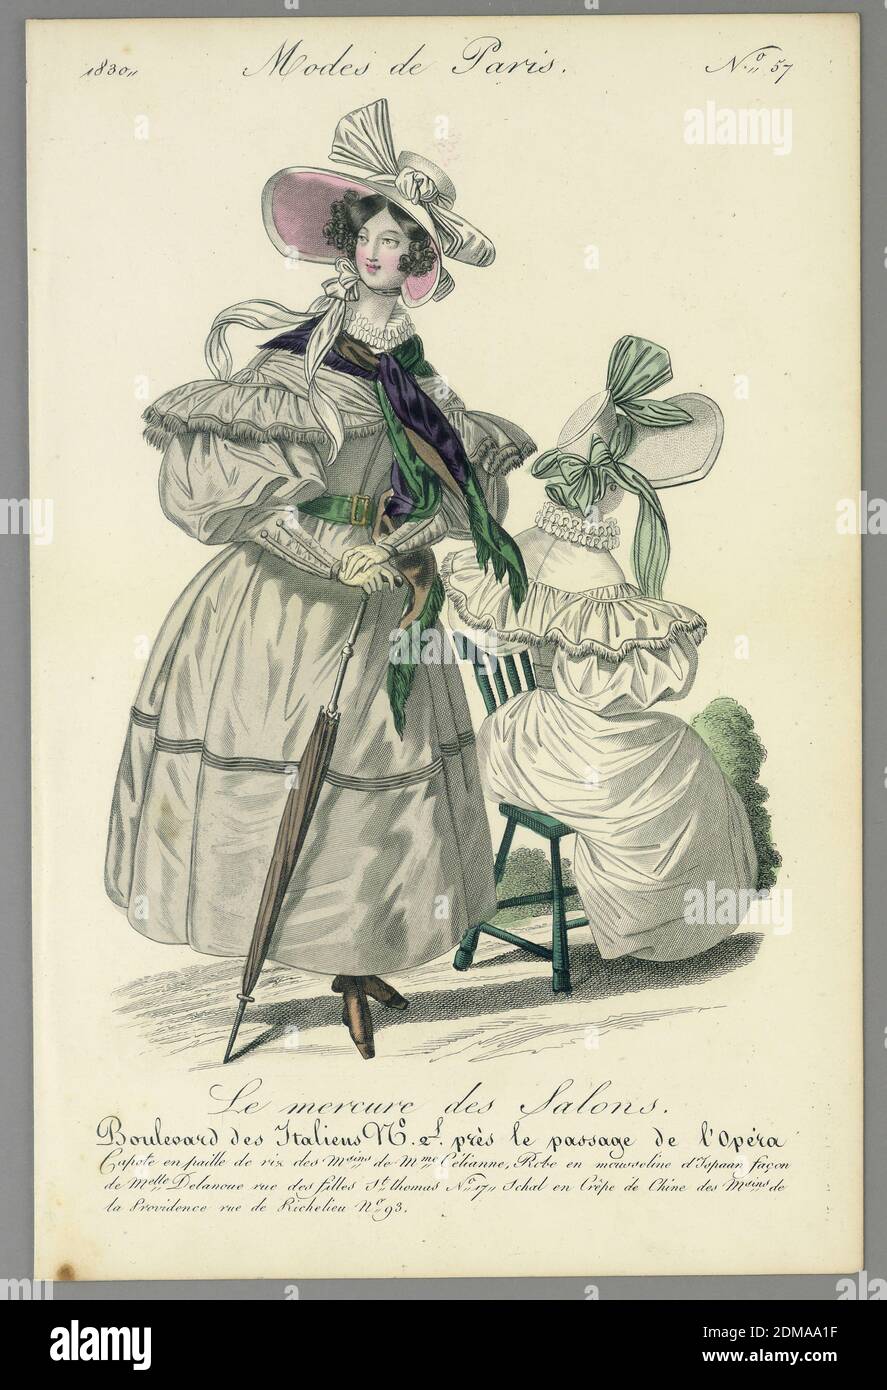 Fashion Plate from Le Mercure des Salons, Modes de Paris, Wood engraving, brush and watercolor on paper, Two women in walking dresses. One stands left, wearing a gray dress and pink lined bonnet, and holding an umbrella. The other, in white, sits right. Title above and below., Paris, France, 1830, Print Stock Photo